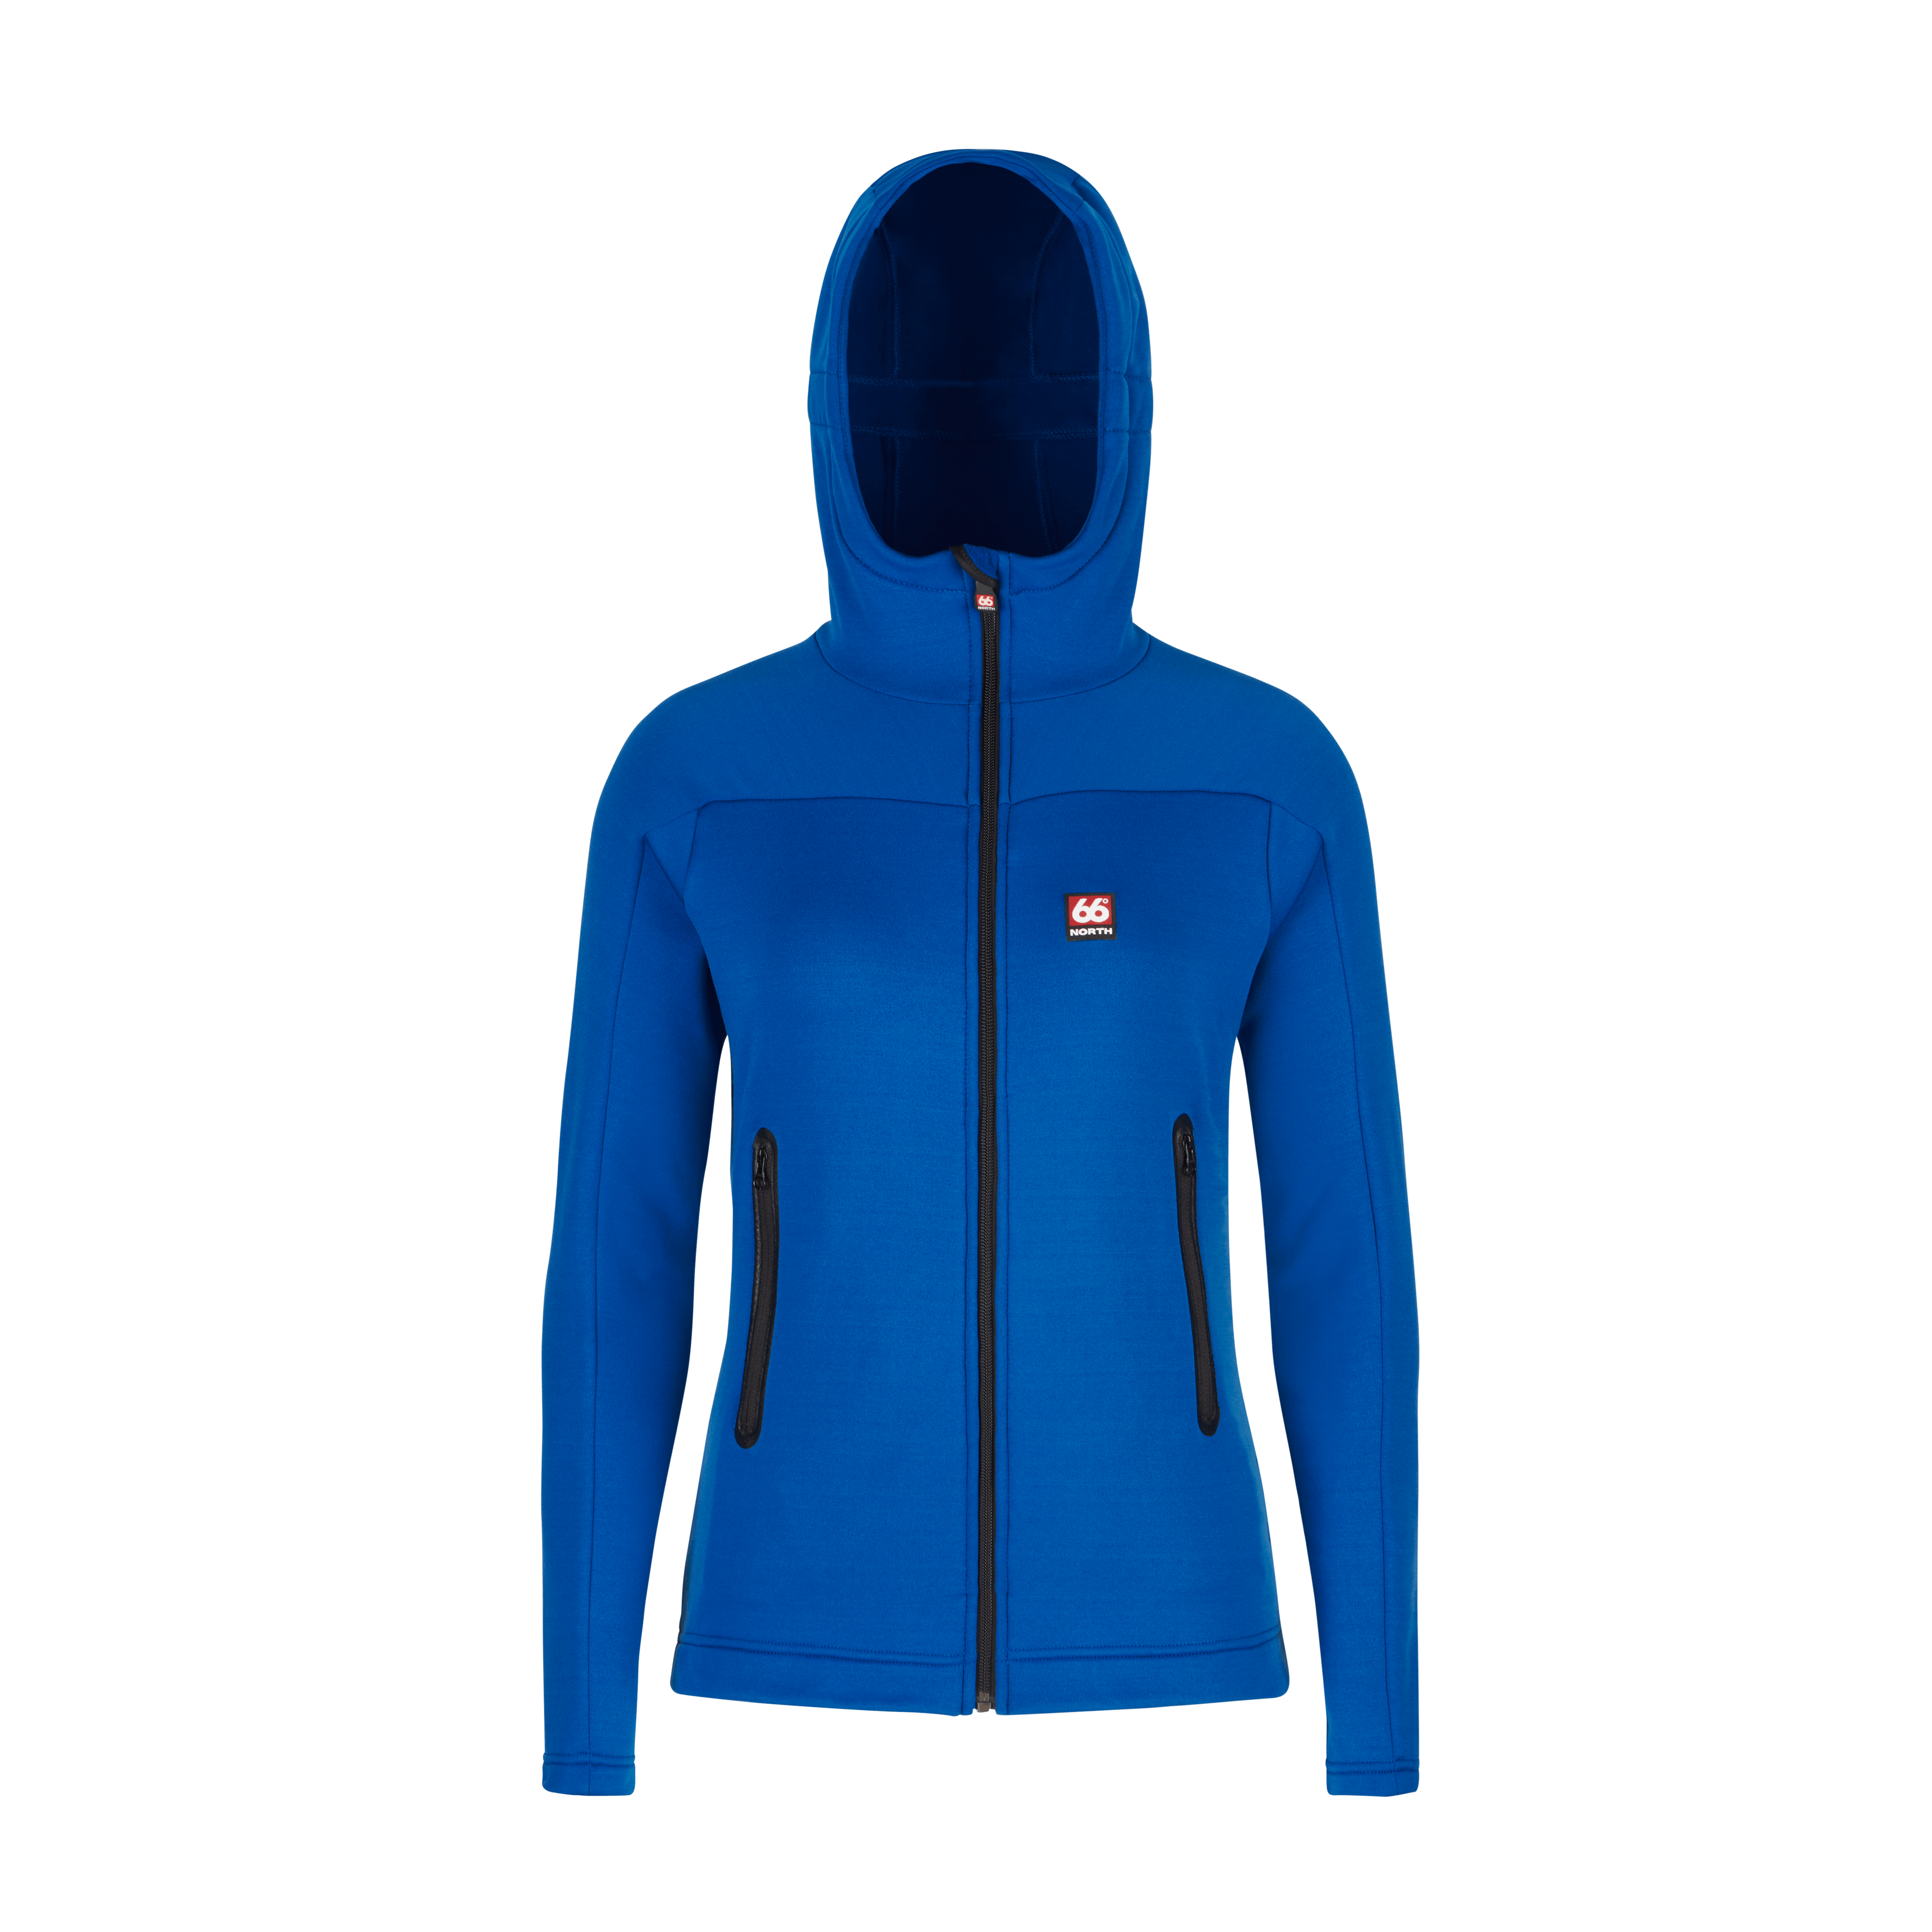 66 North Womens Snfell TopsandVests - Classic Blue - S